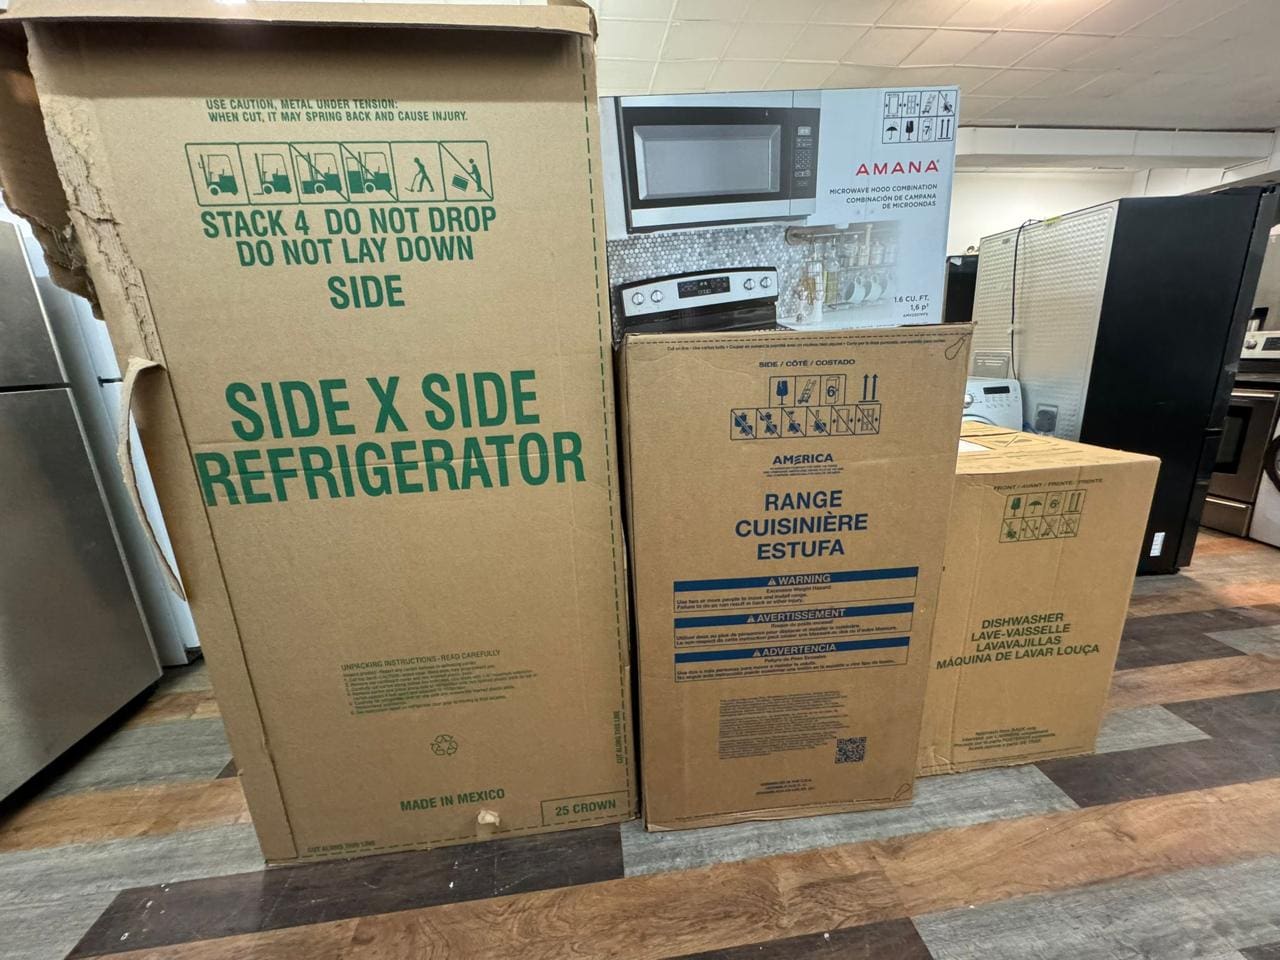 Appliances Package in Box Available (Stove, Refrigerator, Dishwasher, Microwave)